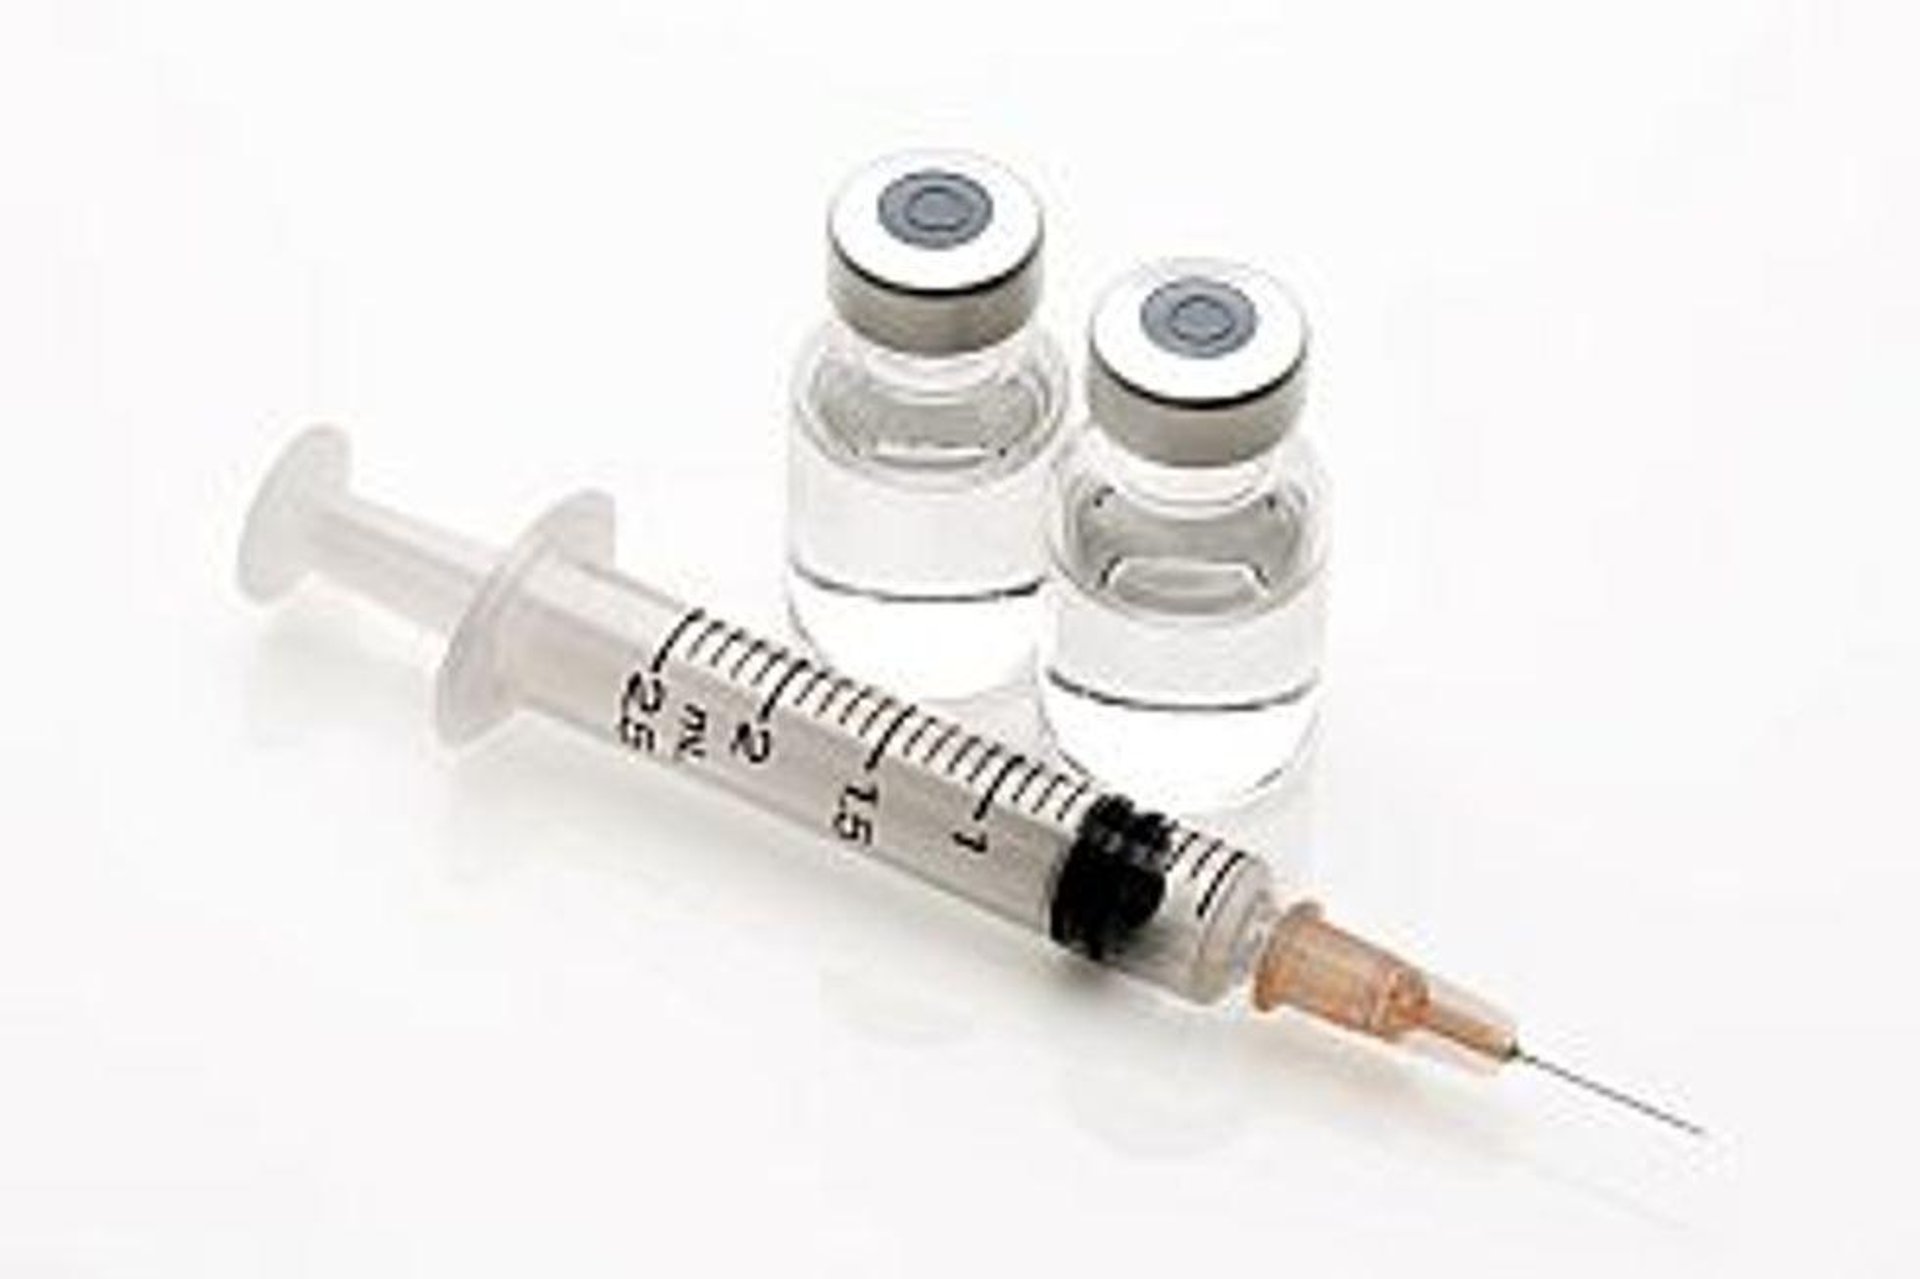 News Picture: Full Approval of Pfizer COVID Vaccine Could Come in September